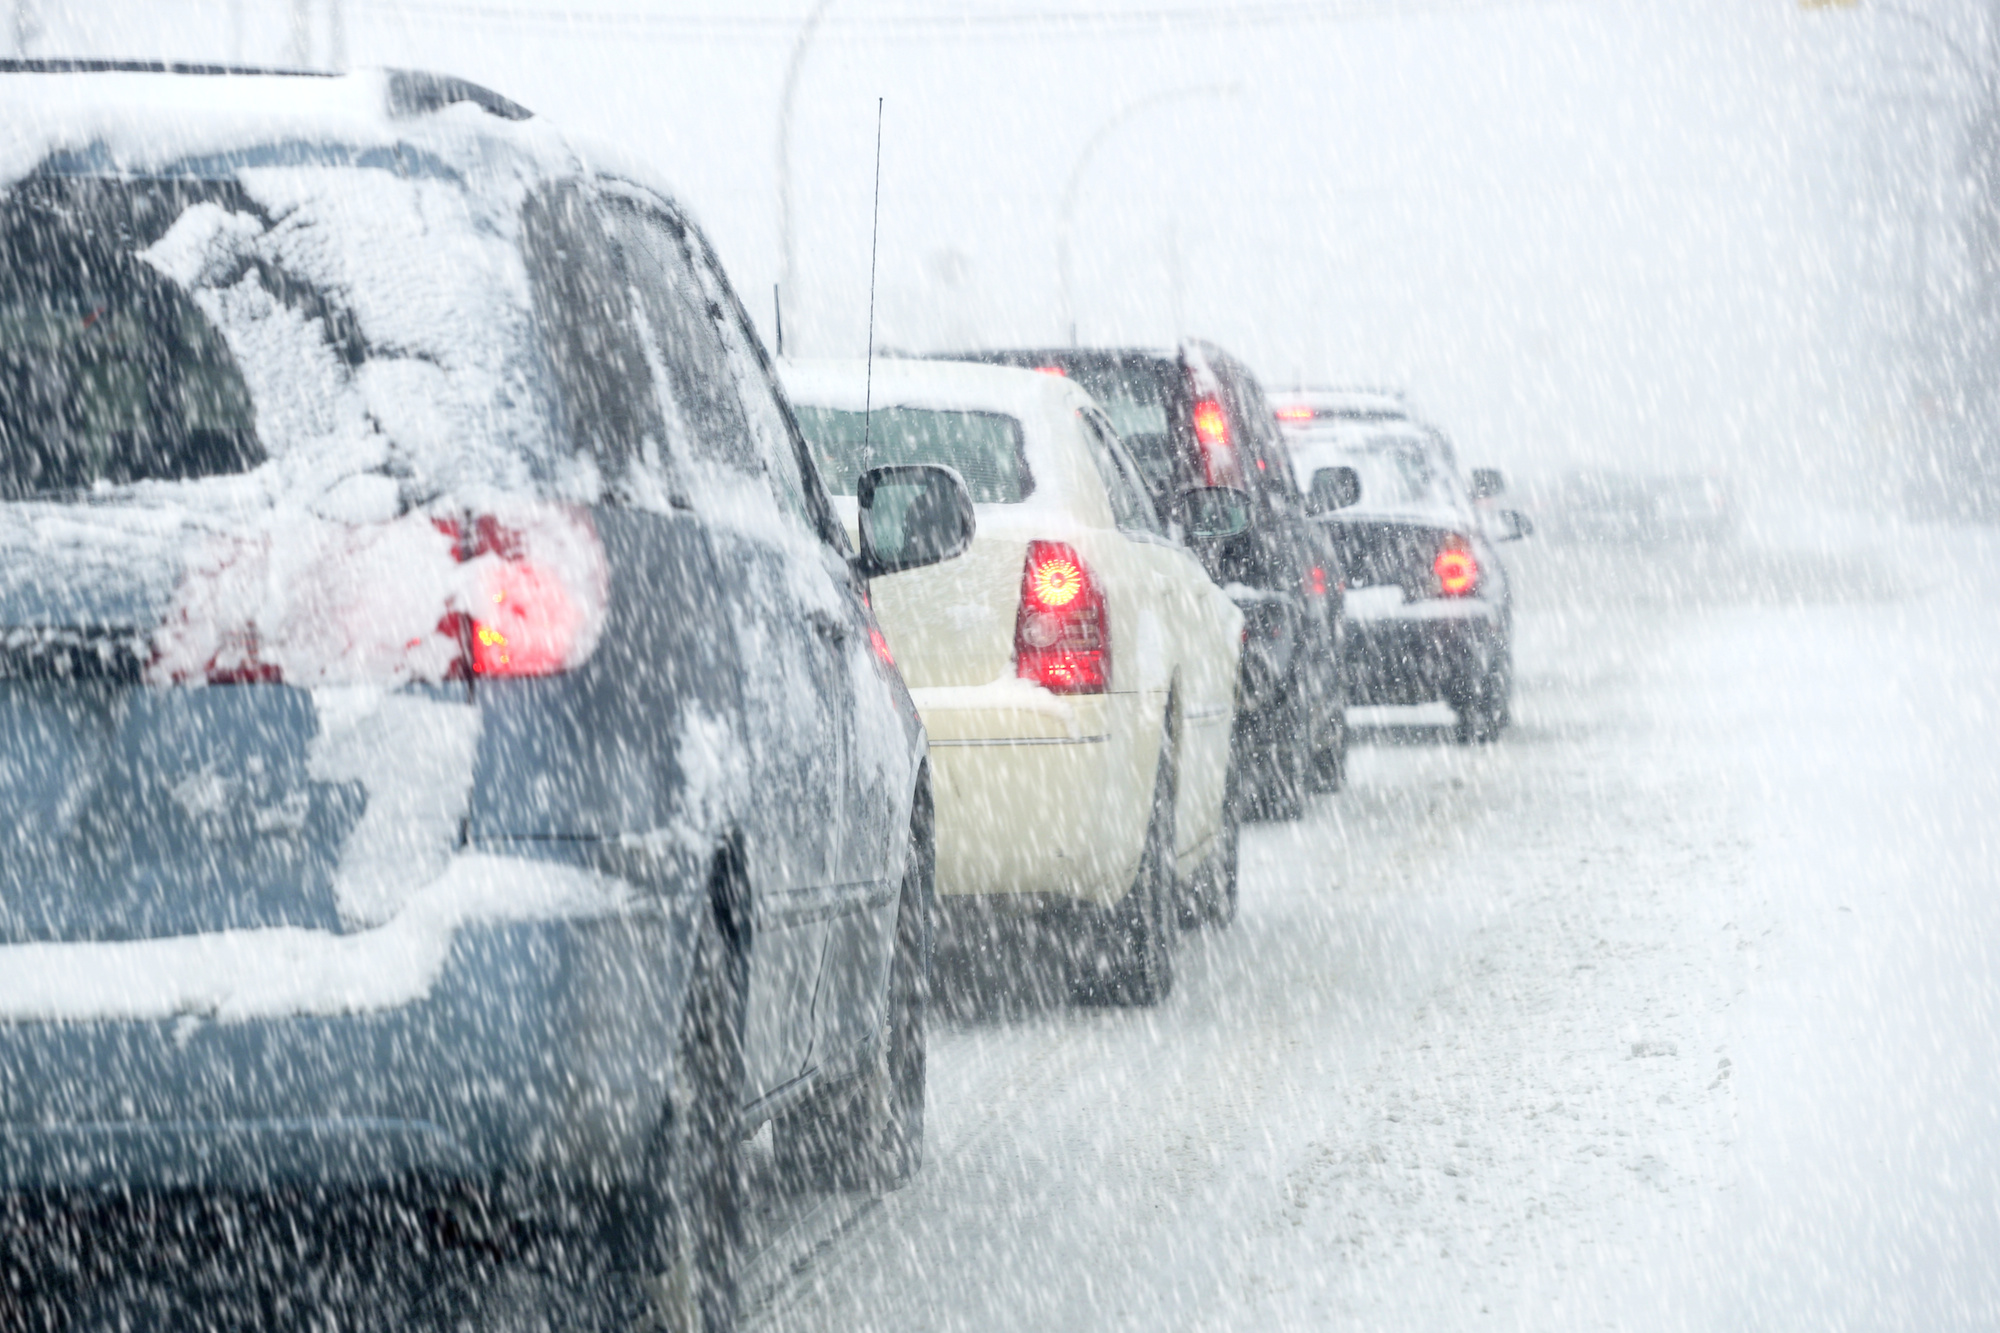 Winter weather travel advisory in effect: Environment Canada